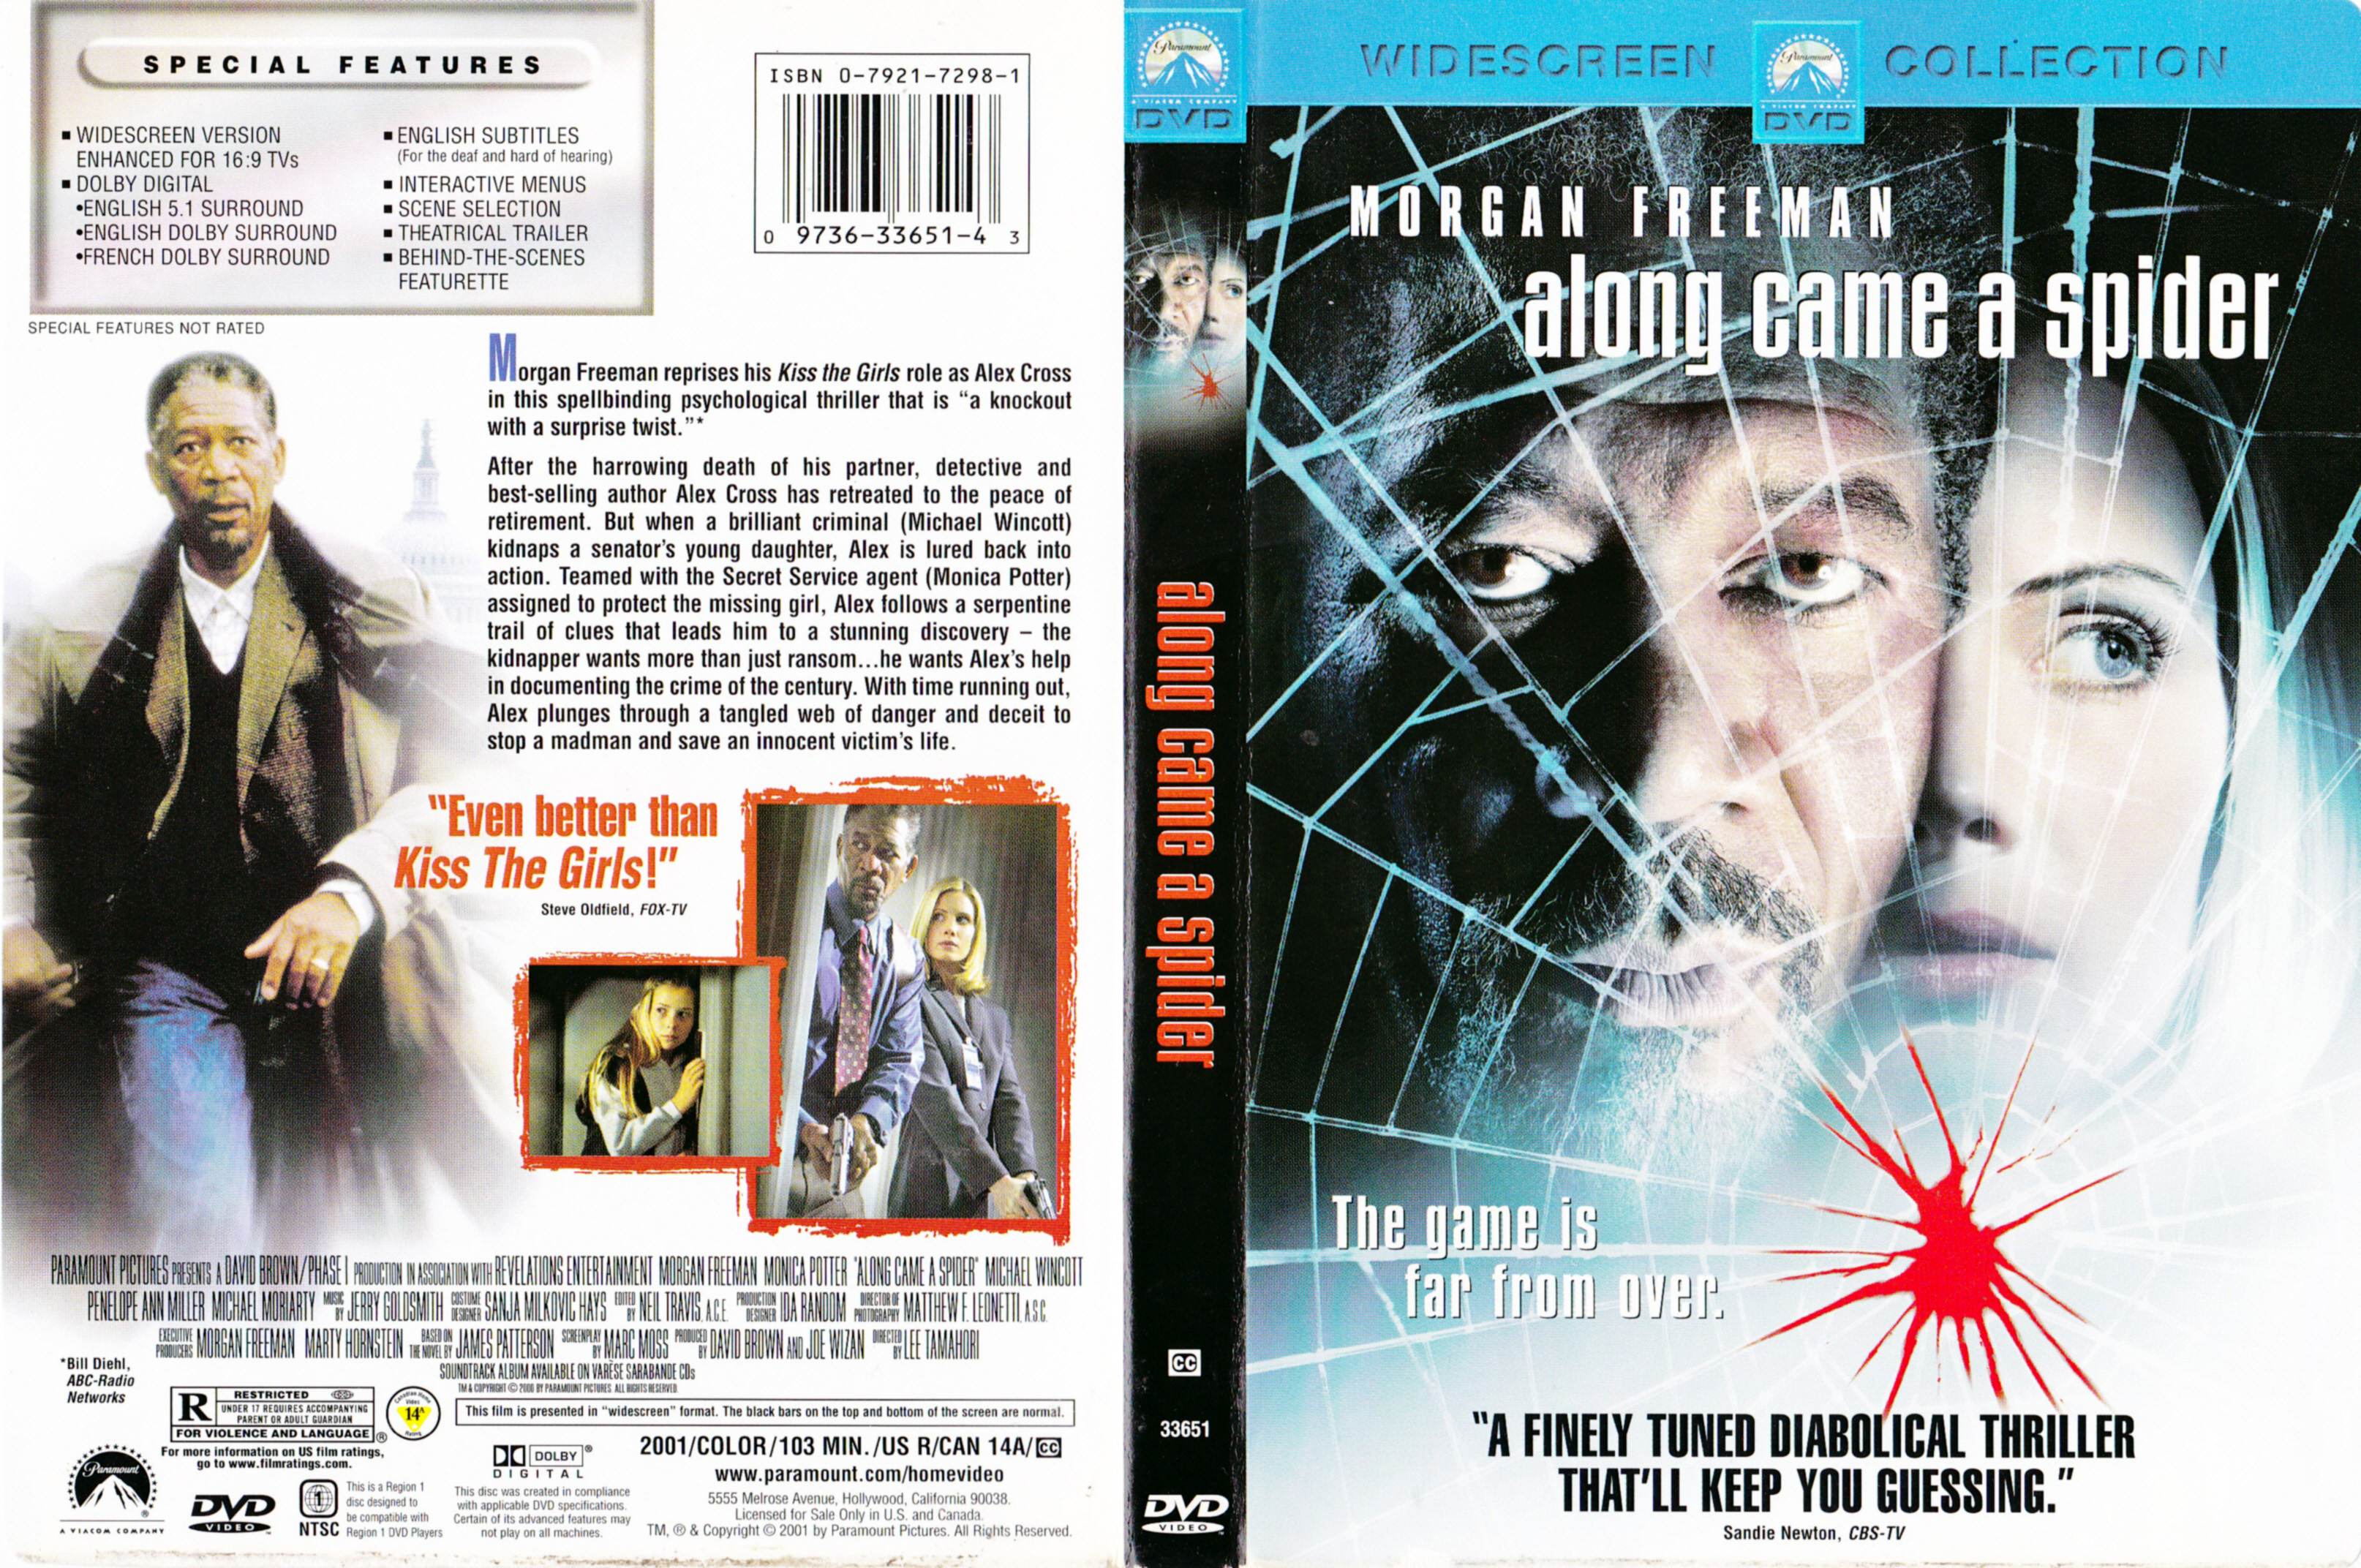 Jaquette DVD Along came a spider (Canadienne)